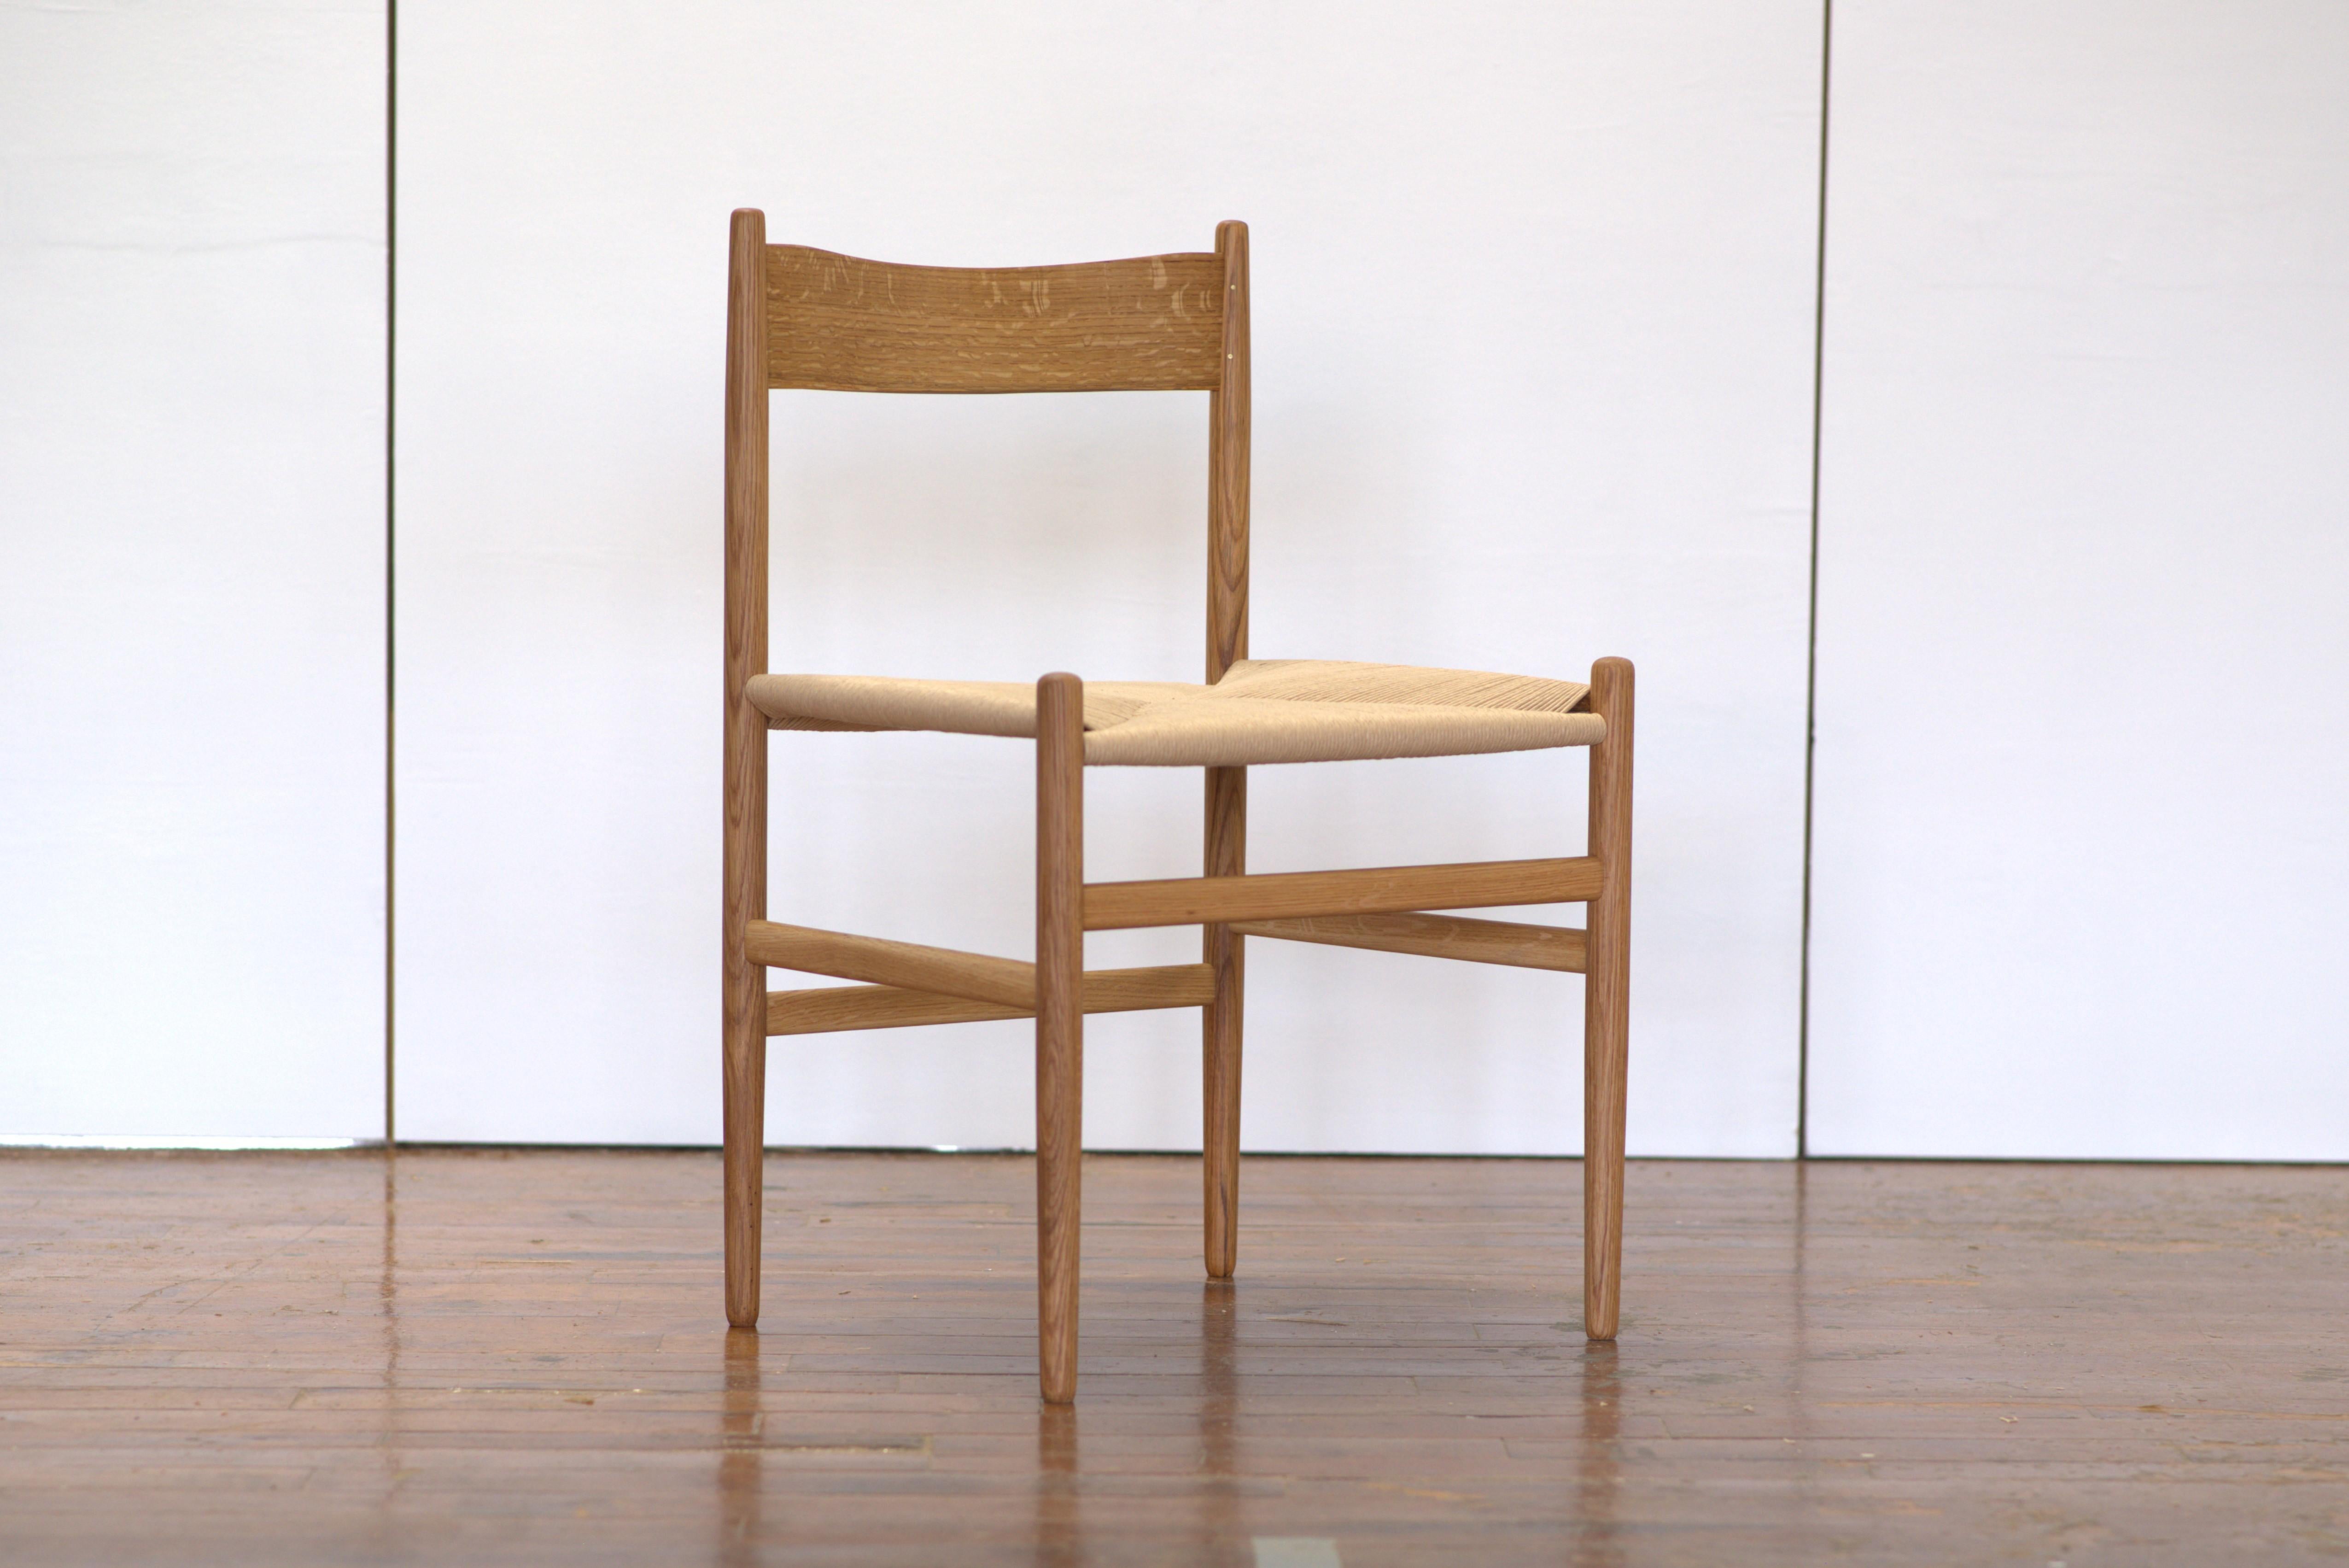 Inspired by simple Shaker chairs and Danish designers’ interpretations of the same chairs. The legs are turned simply, widening at the centering to accept the mortise and tenon joinery of the consistently shaped stretchers. 

Distilled to its